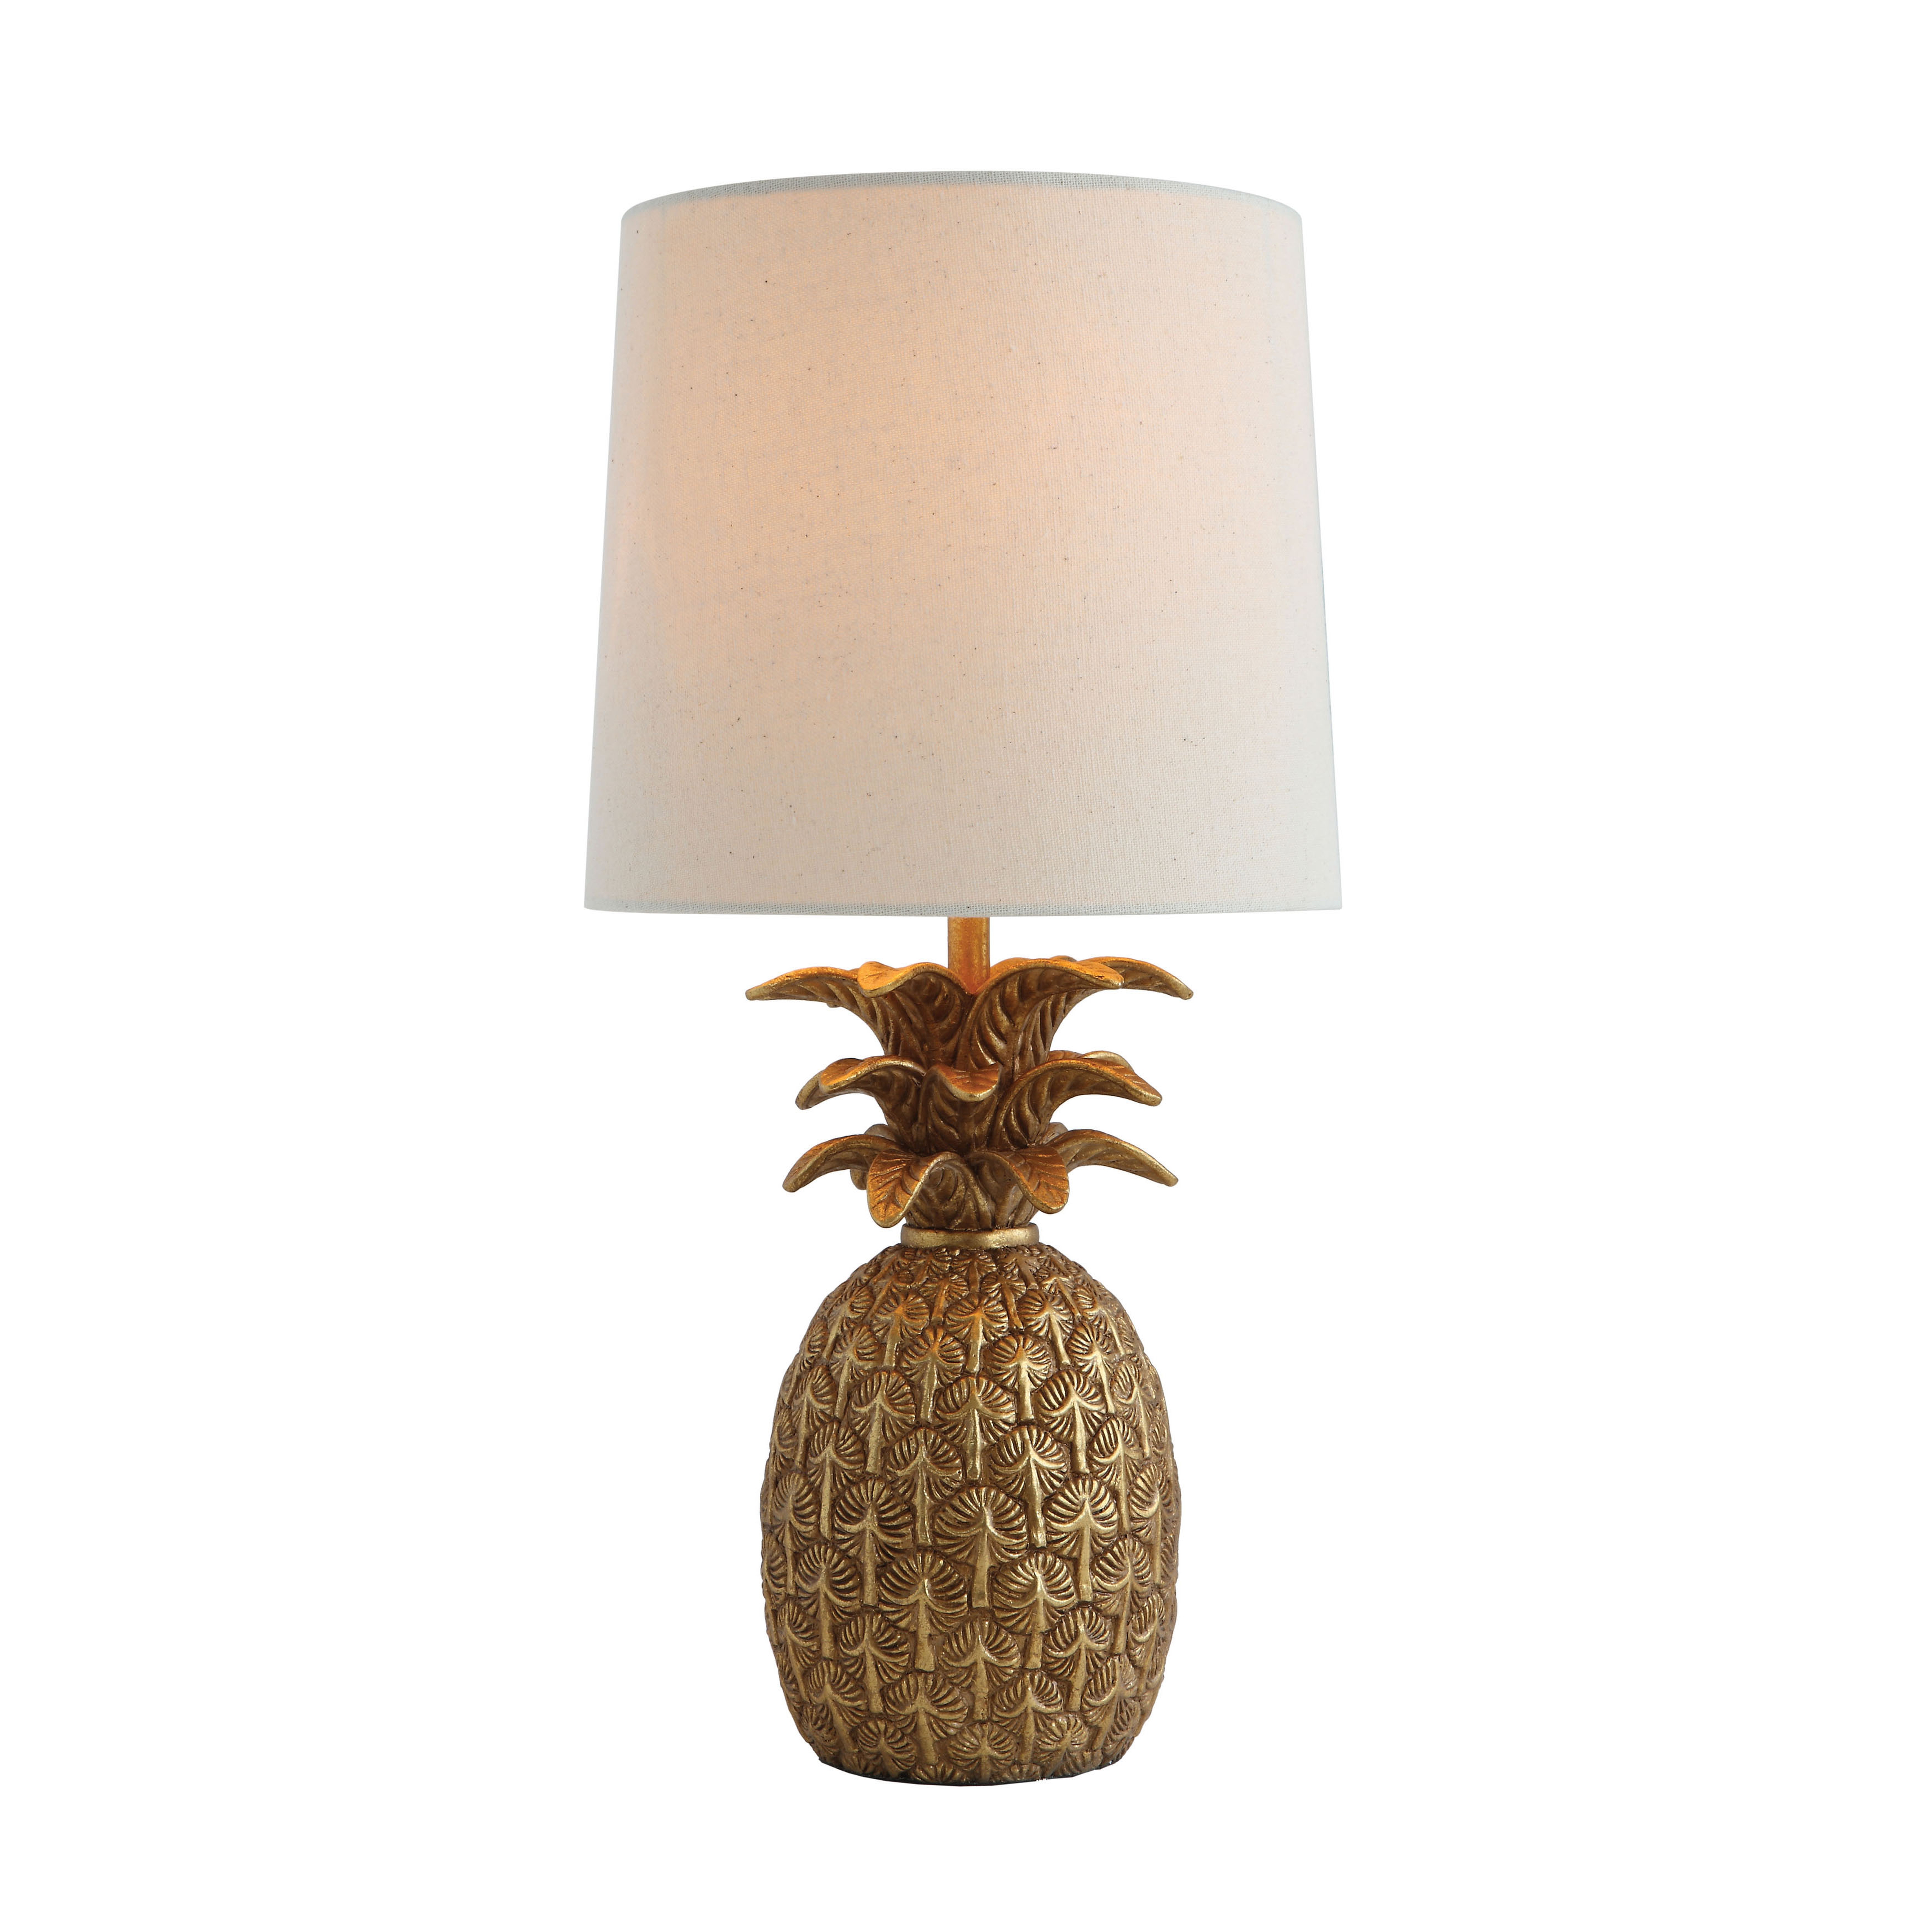 Resin Pineapple Shaped Table Lamp with Distressed Finish & Linen Shade - Nomad Home